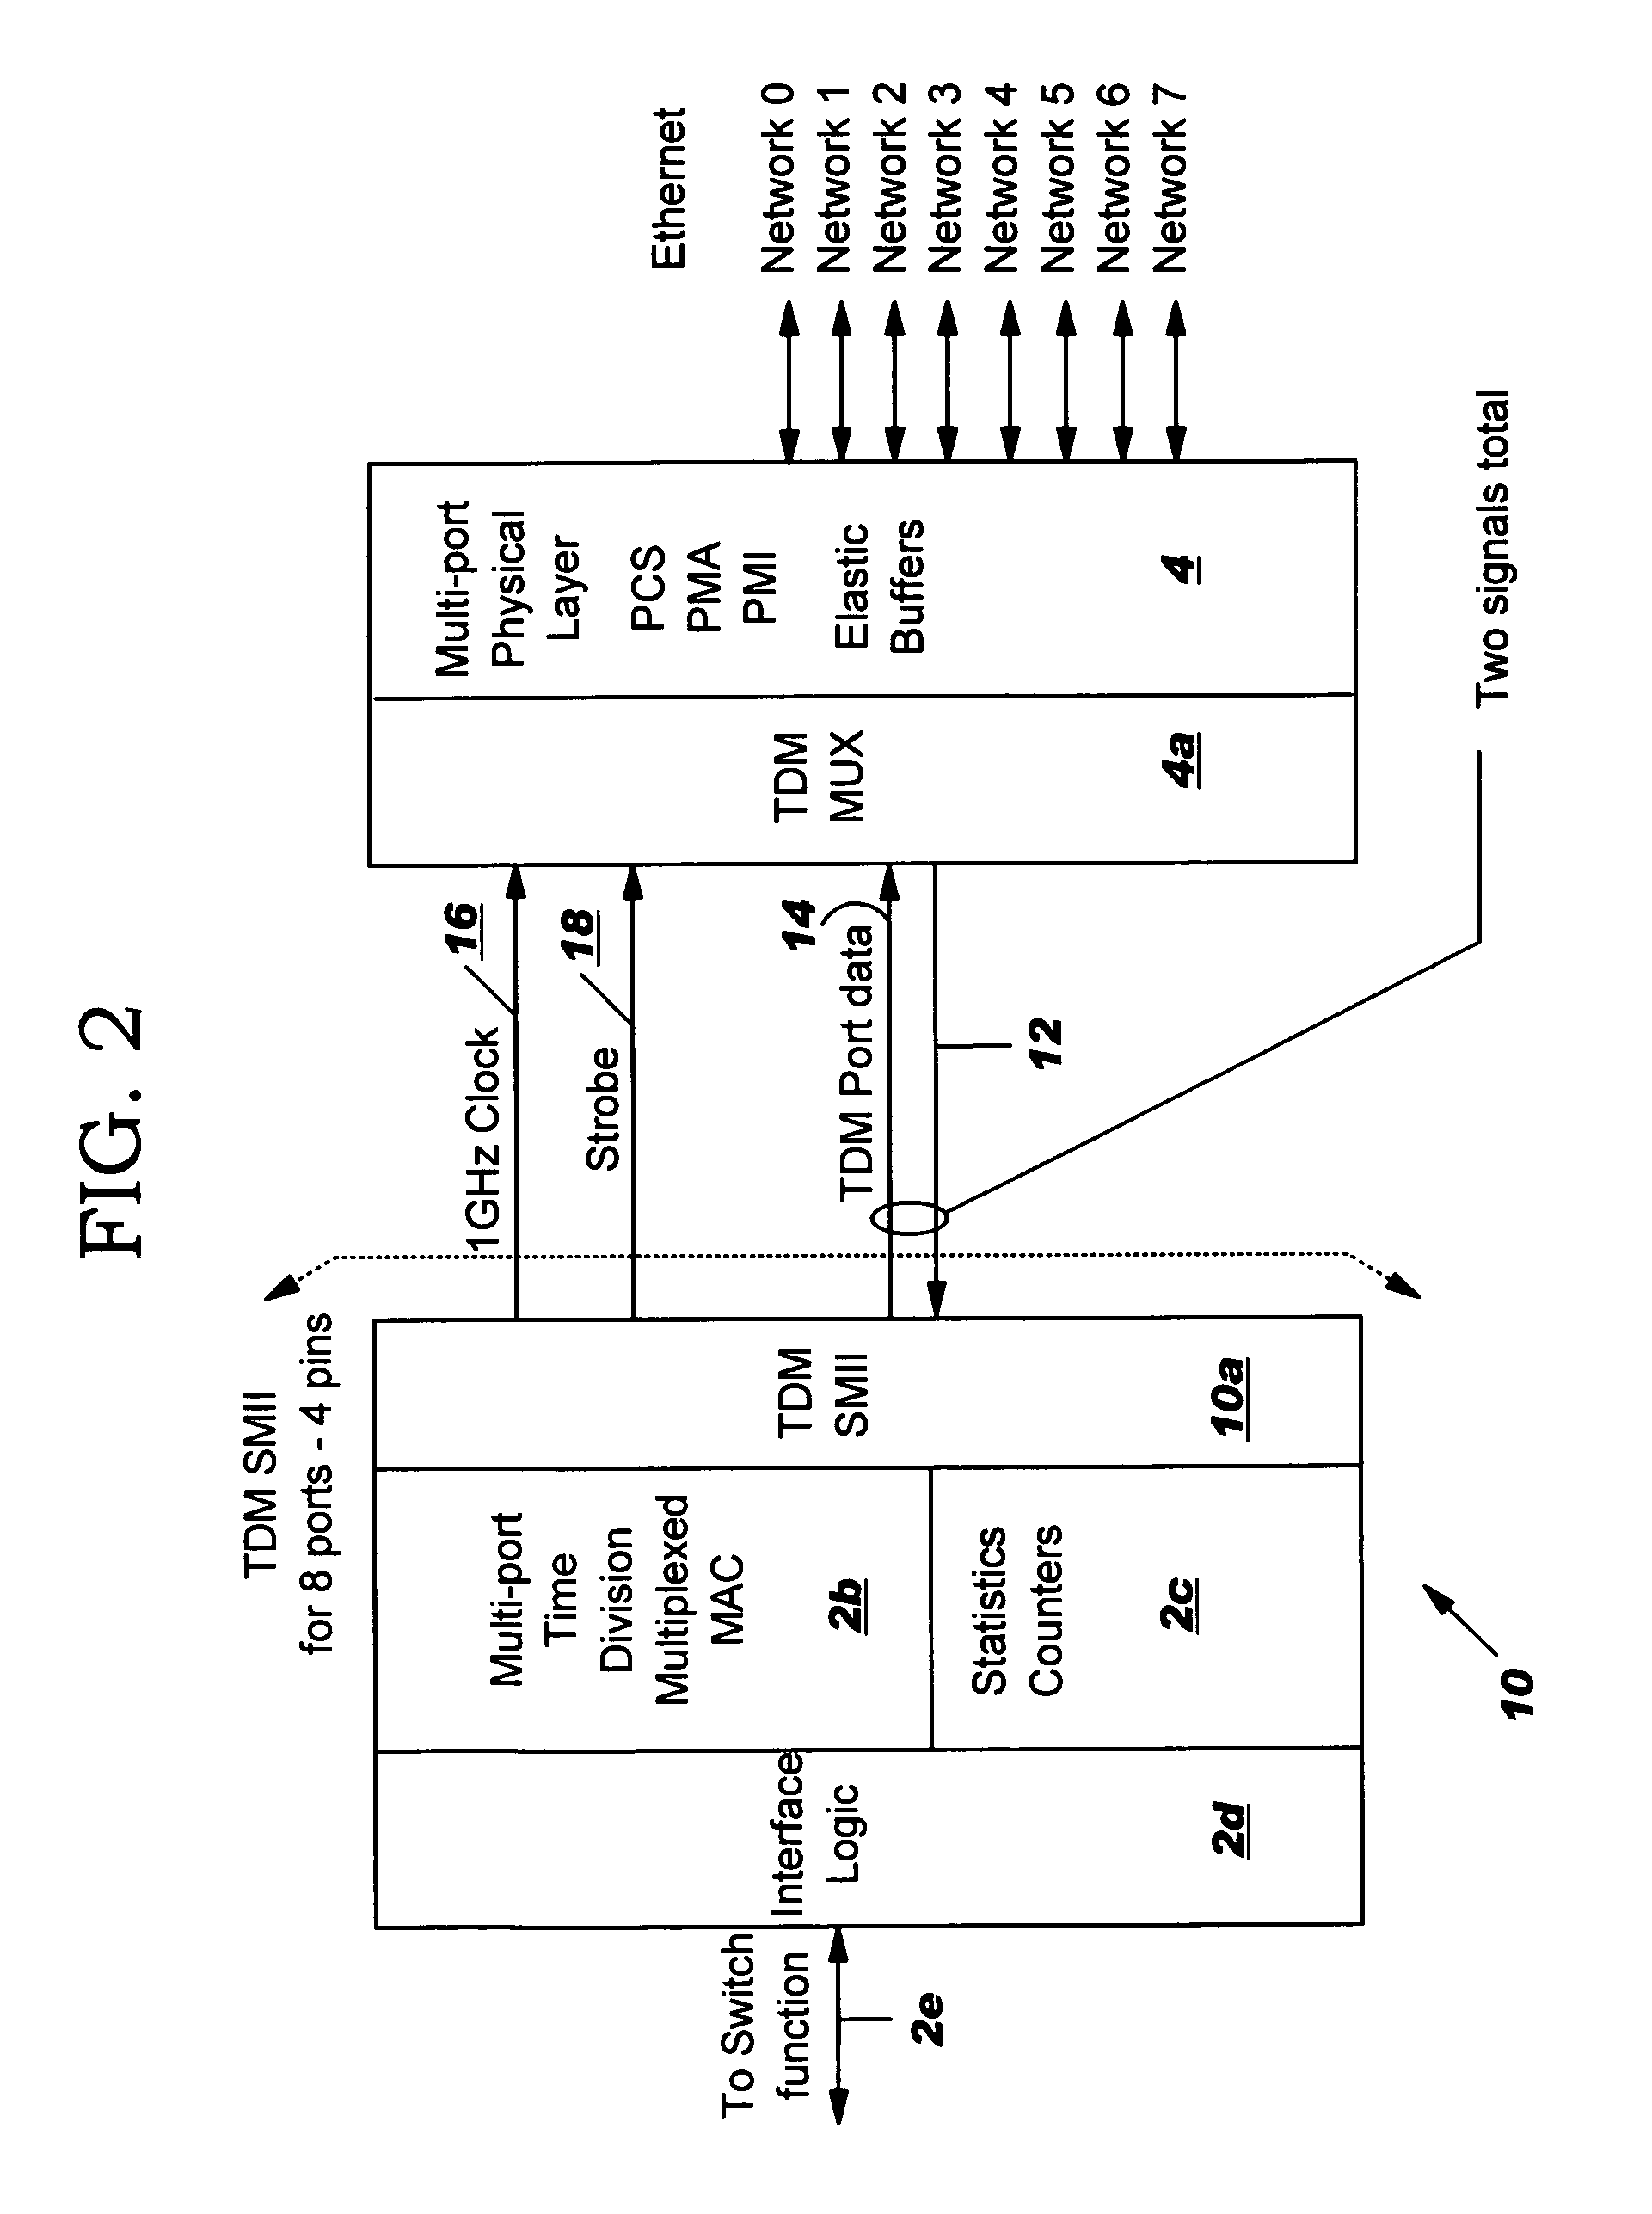 Method and system for fast ethernet serial port multiplexing to reduce I/O pin count